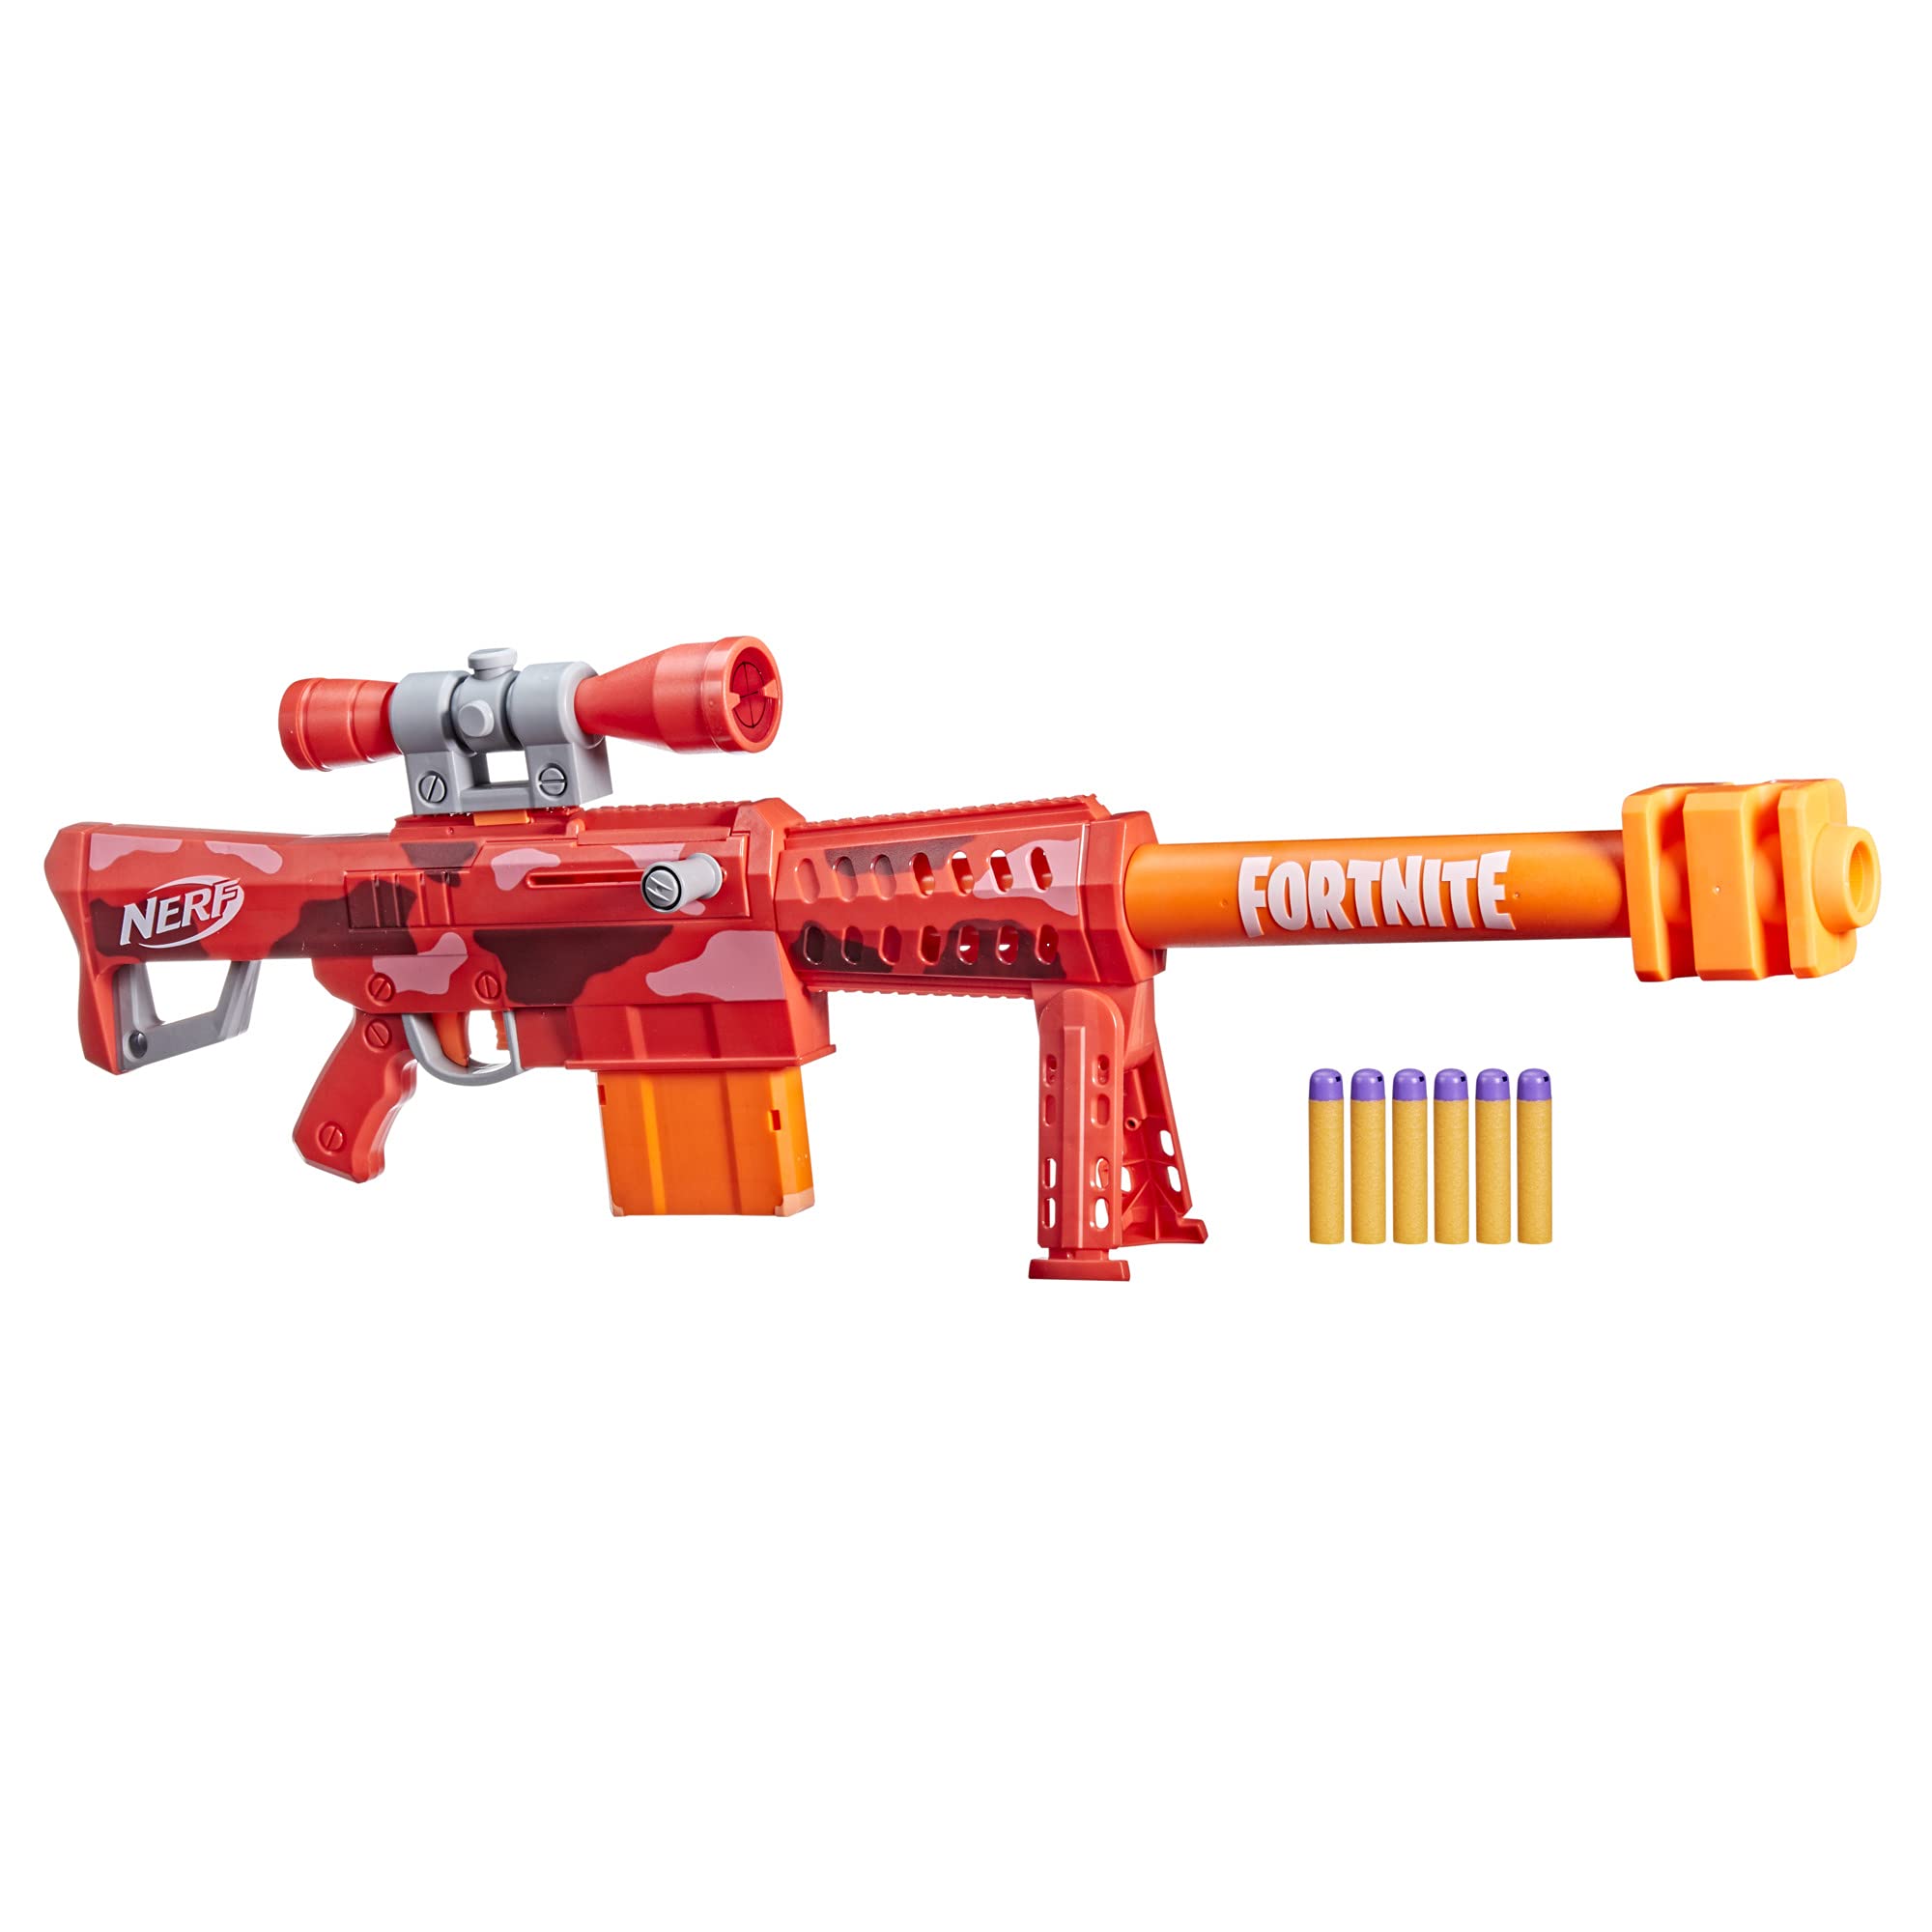 43" Nerf Fortnite Heavy SR Blaster w/ Removable Scope, Bolt Action, 6 Official Mega Darts and 6-Dart Clip $24.52 + Free Shipping w/ Prime or on $35+